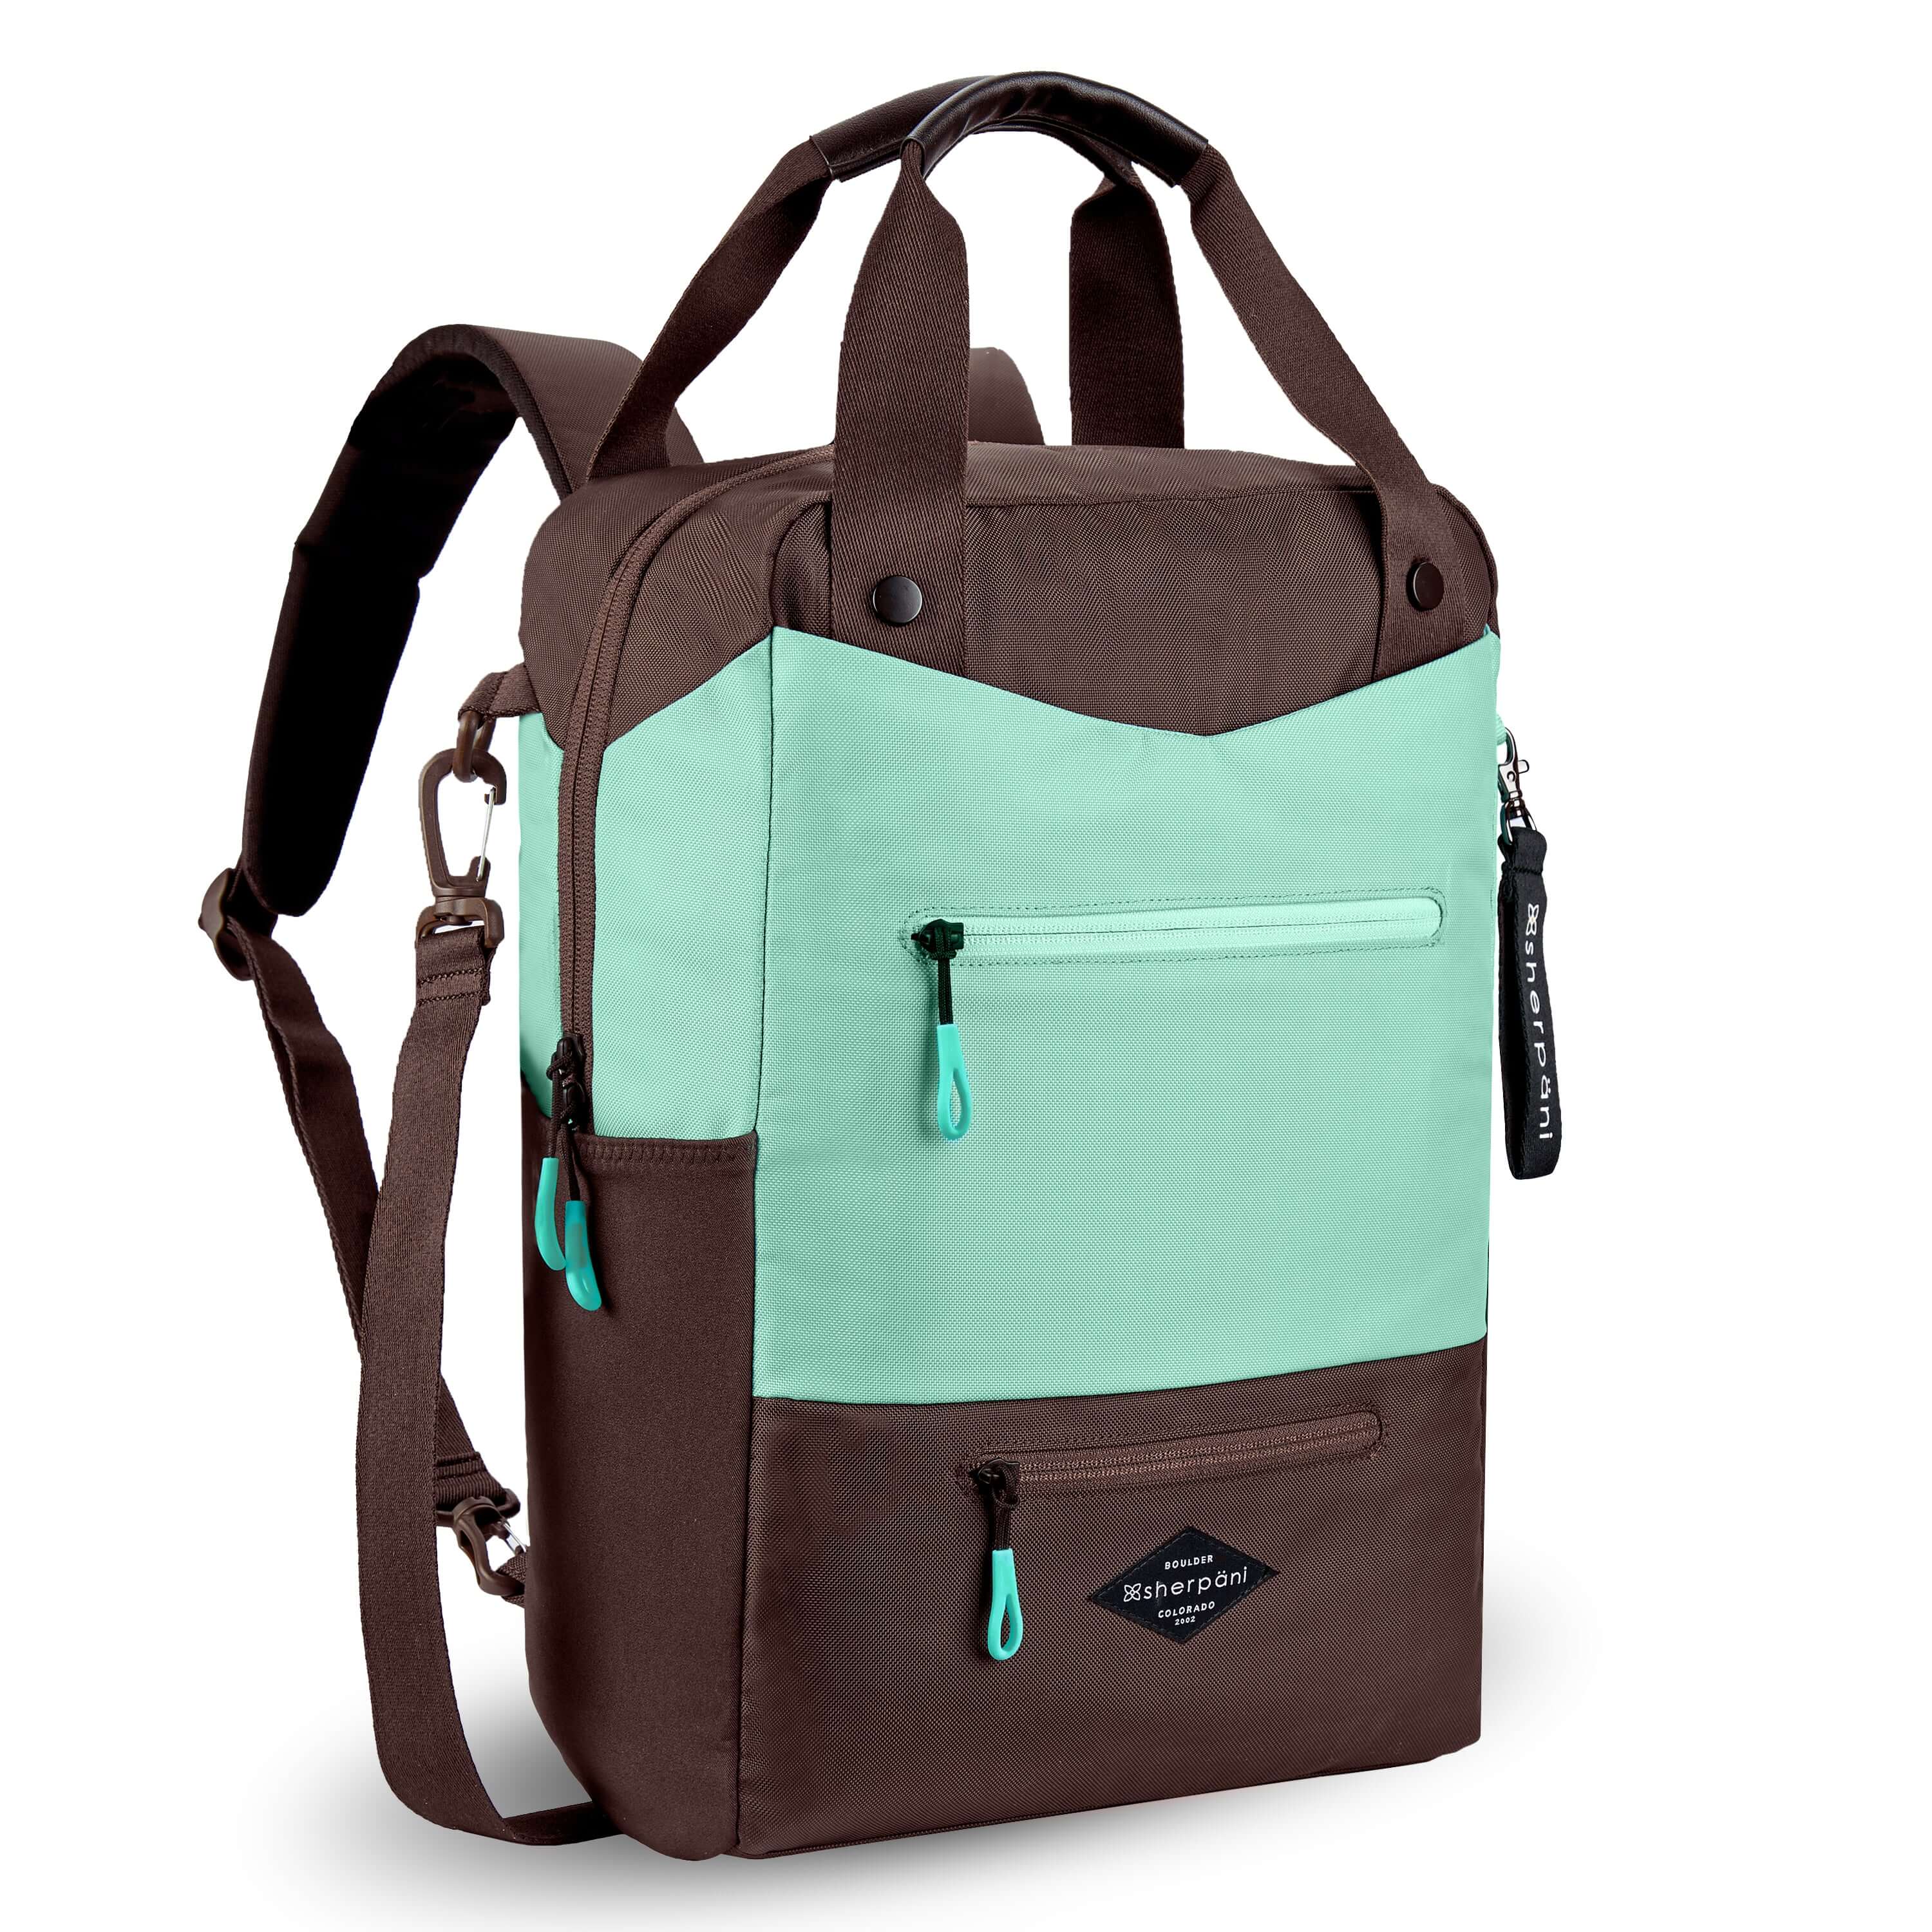 Angled front view of Sherpani's three-in-one bag, the Camden in Seagreen. The bag is two-toned in light green and brown. There are two external zipper pockets on the front panel with easy-pull zippers in light green. A branded Sherpani keychain is clipped to the upper right corner. An elastic water bottle holder sits on either side of the bag. The bag has an adjustable/detachable crossbody strap, padded/adjustable backpack straps and short tote handles fixed at the top. #color_seagreen